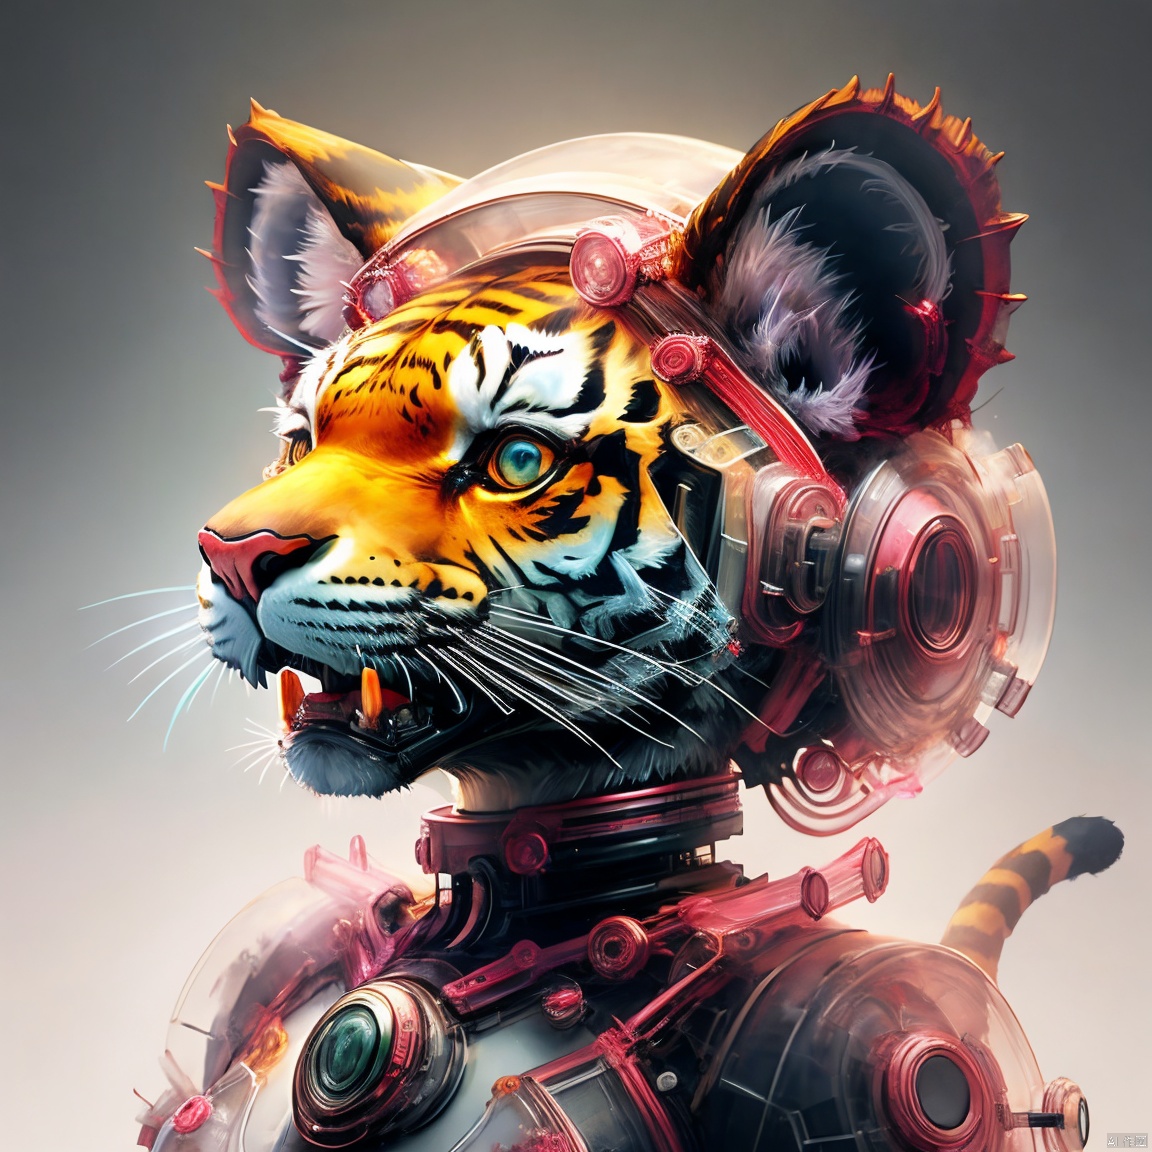 The robot, the head of a tiger, has an extremely delicate and complex mechanical structure on the front, with illustrations, X-ray perspective, and by Nick Veasey, the image appears very ethereal, reflecting the beauty of technology and art,arttoy